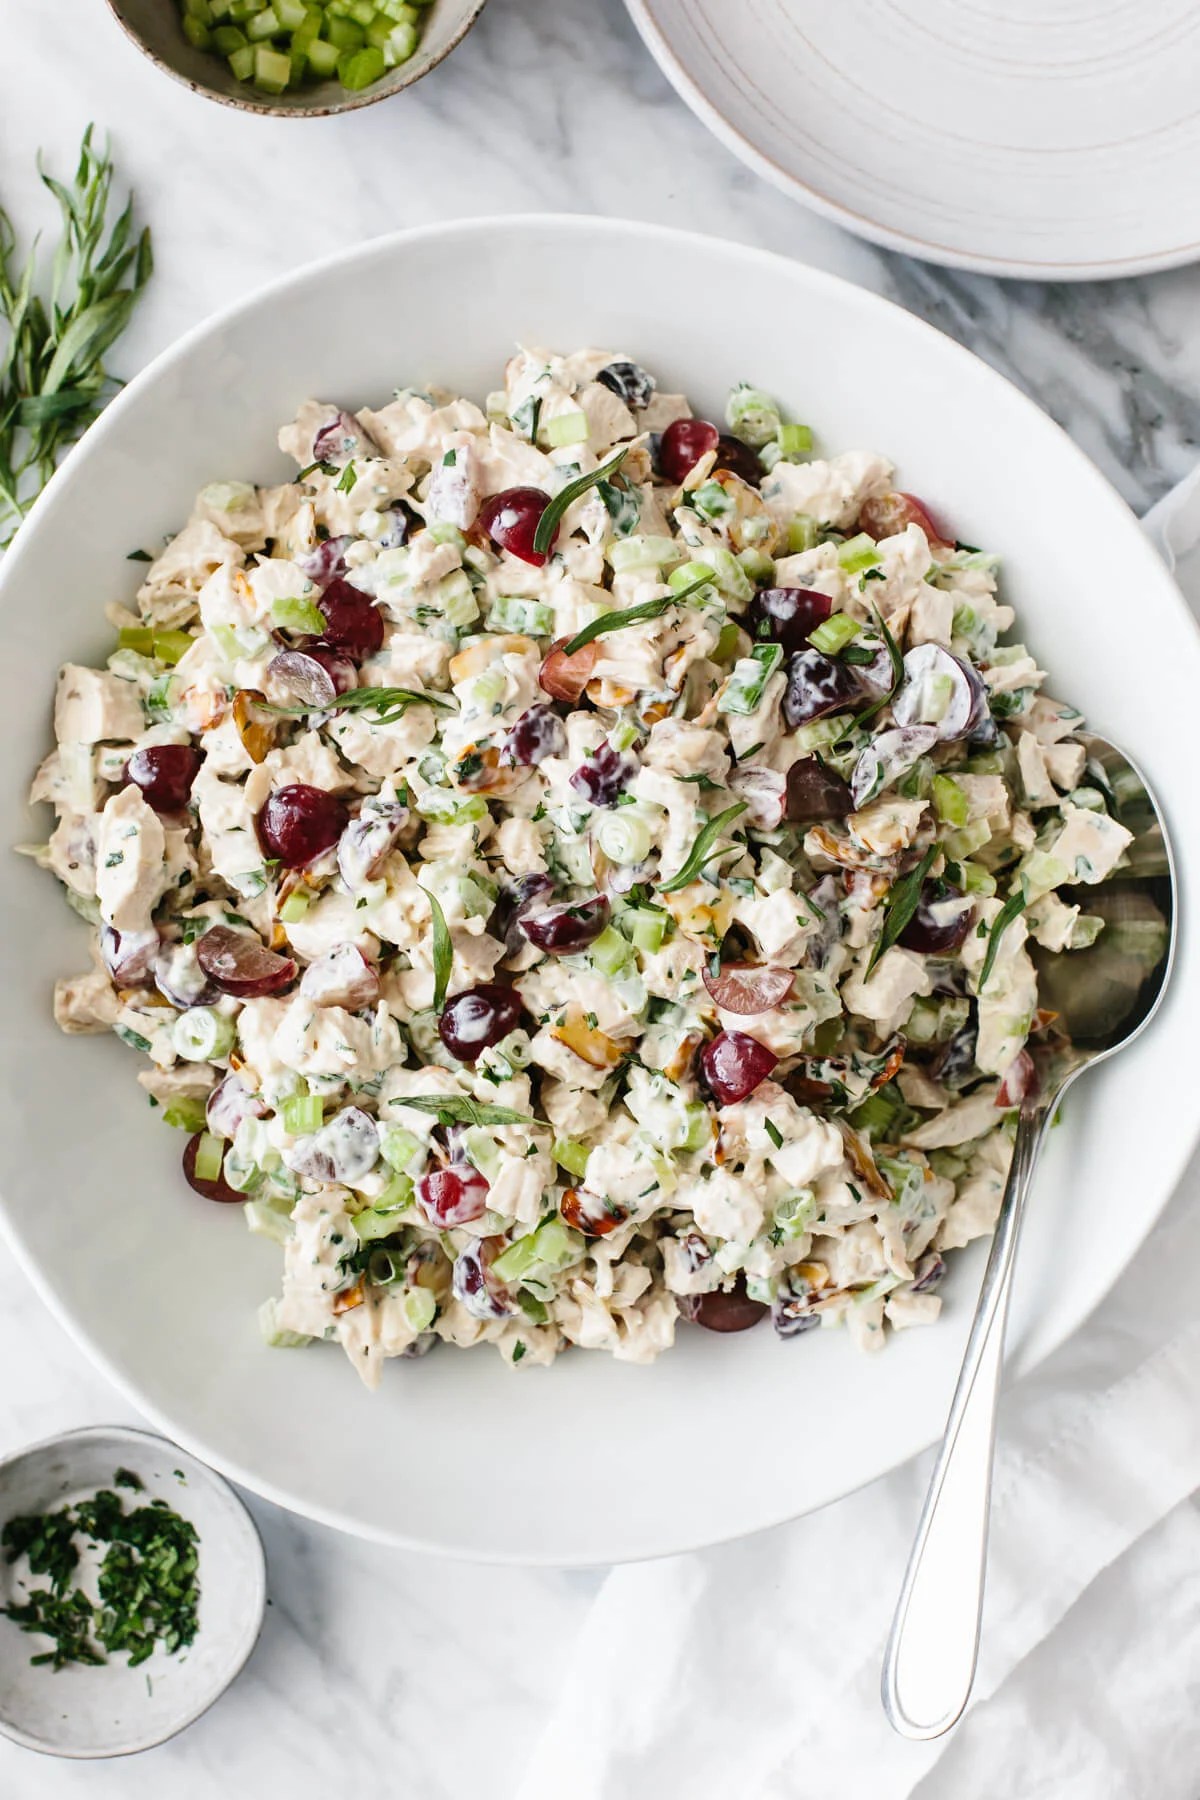 Chicken Salad Without Celery: A Crunch-Free Option